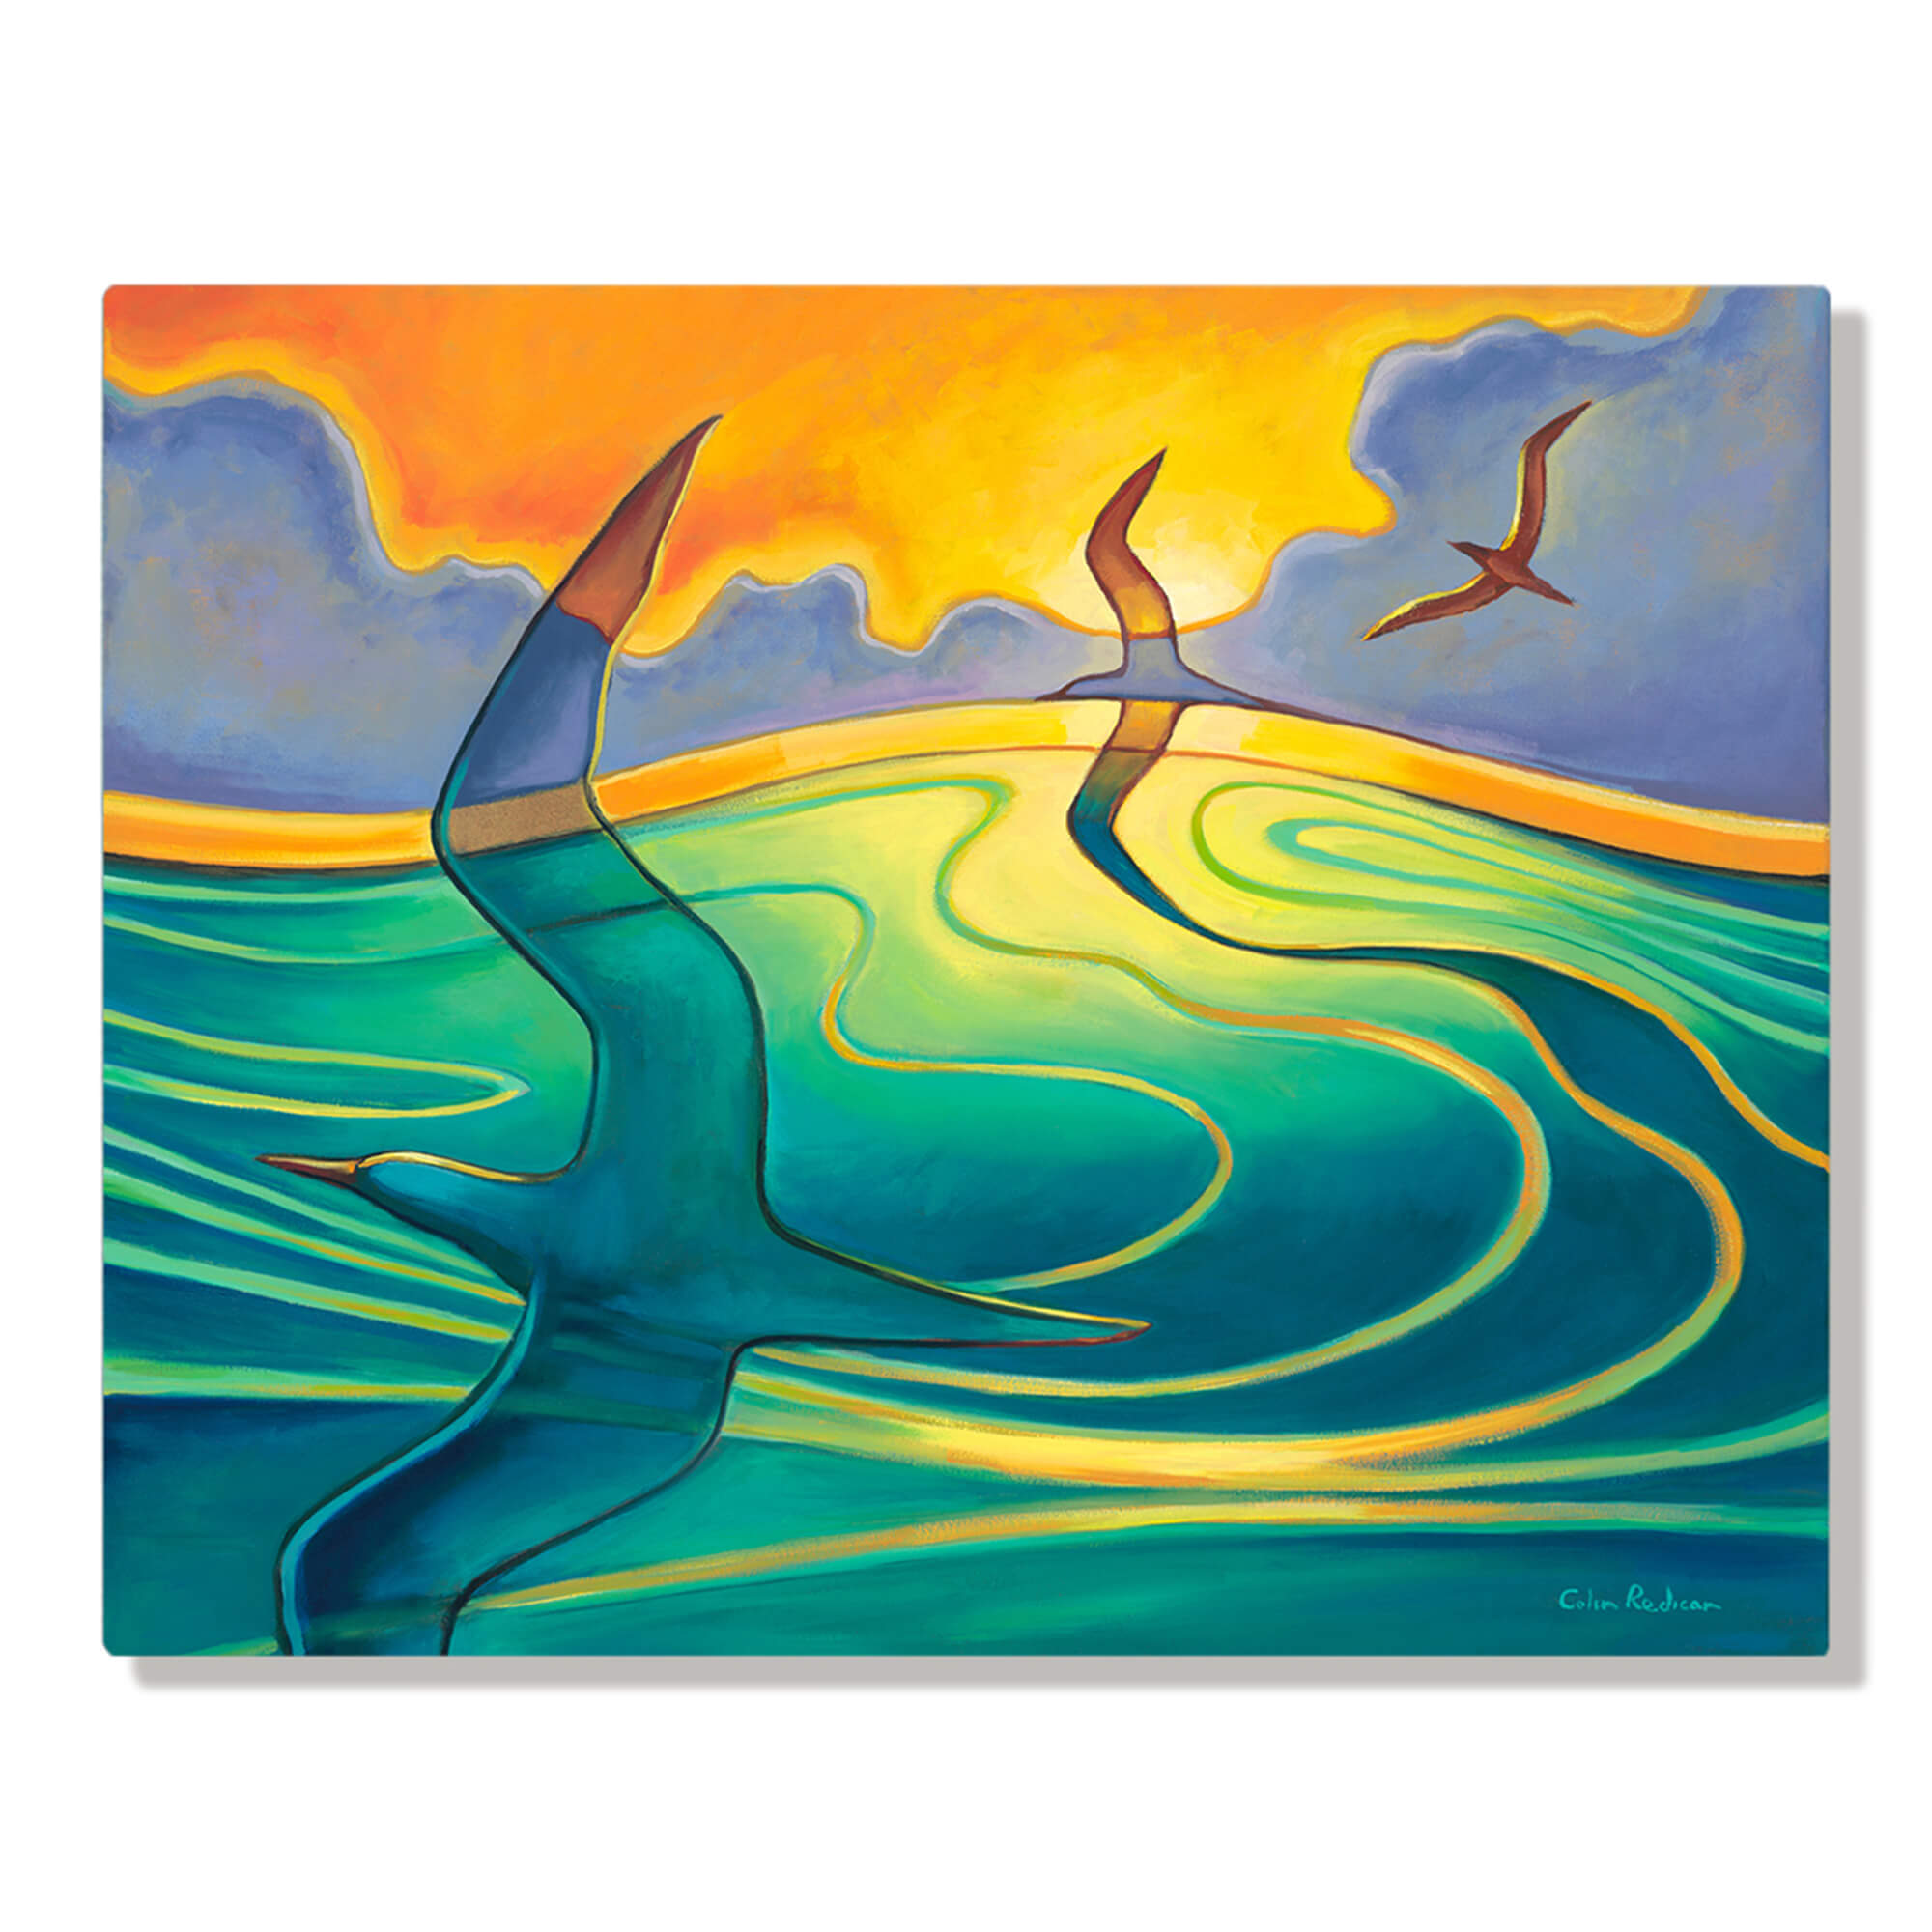 An abstract depicting of birds flying by Hawaii artist Colin Redican